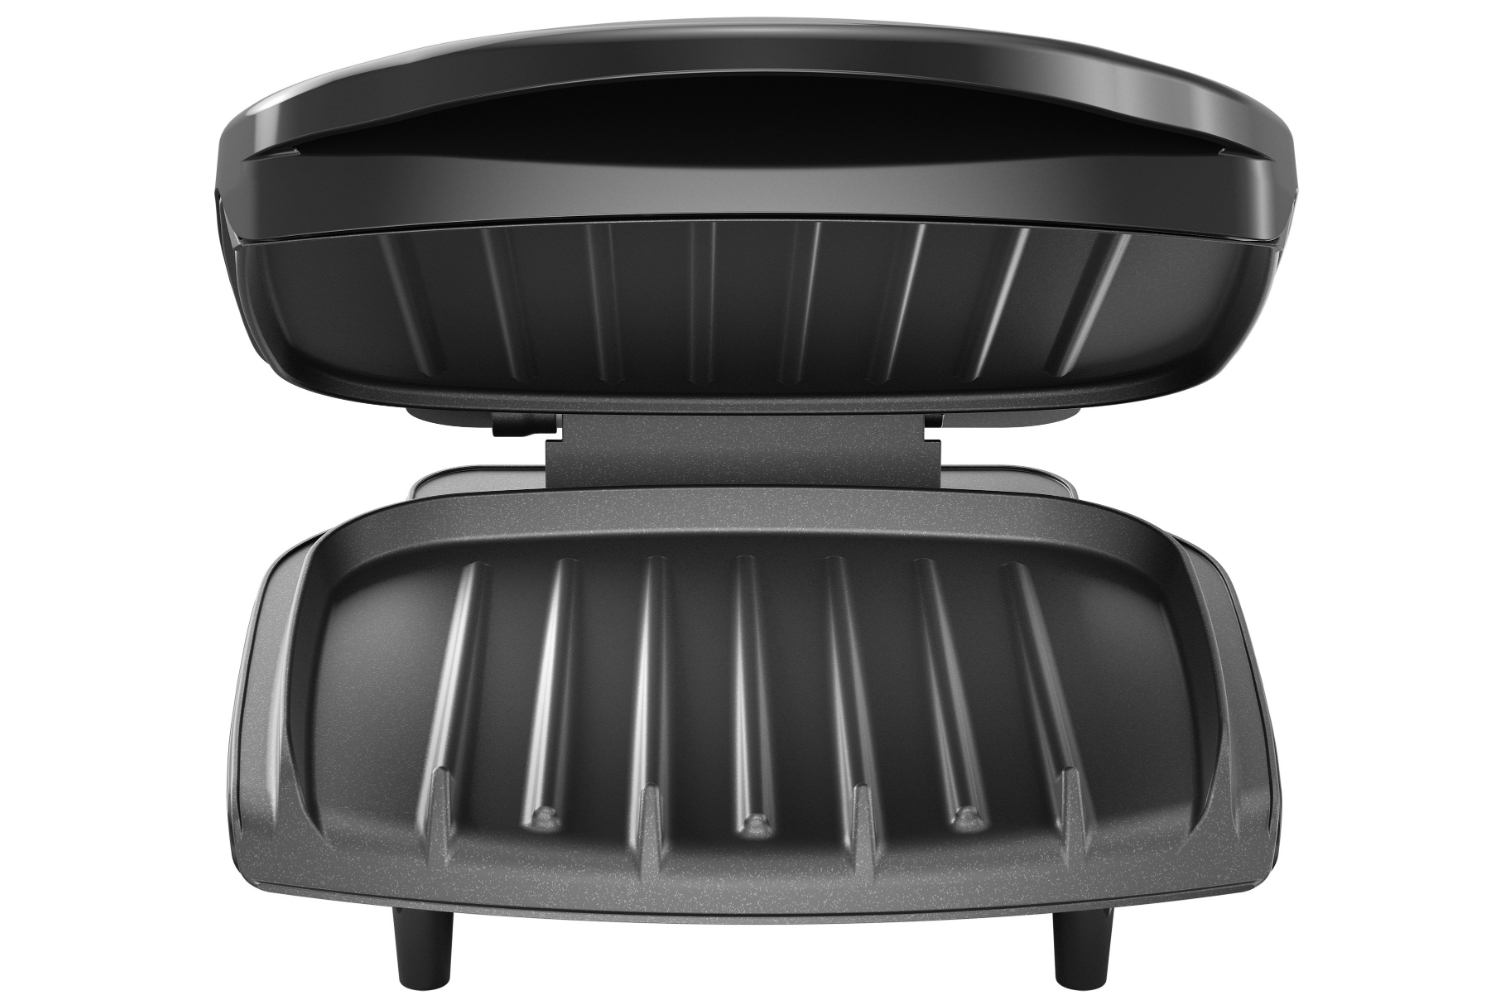 walmart deals on george foreman electric grills and griddles 2 serving classic plate indoor grill panini press